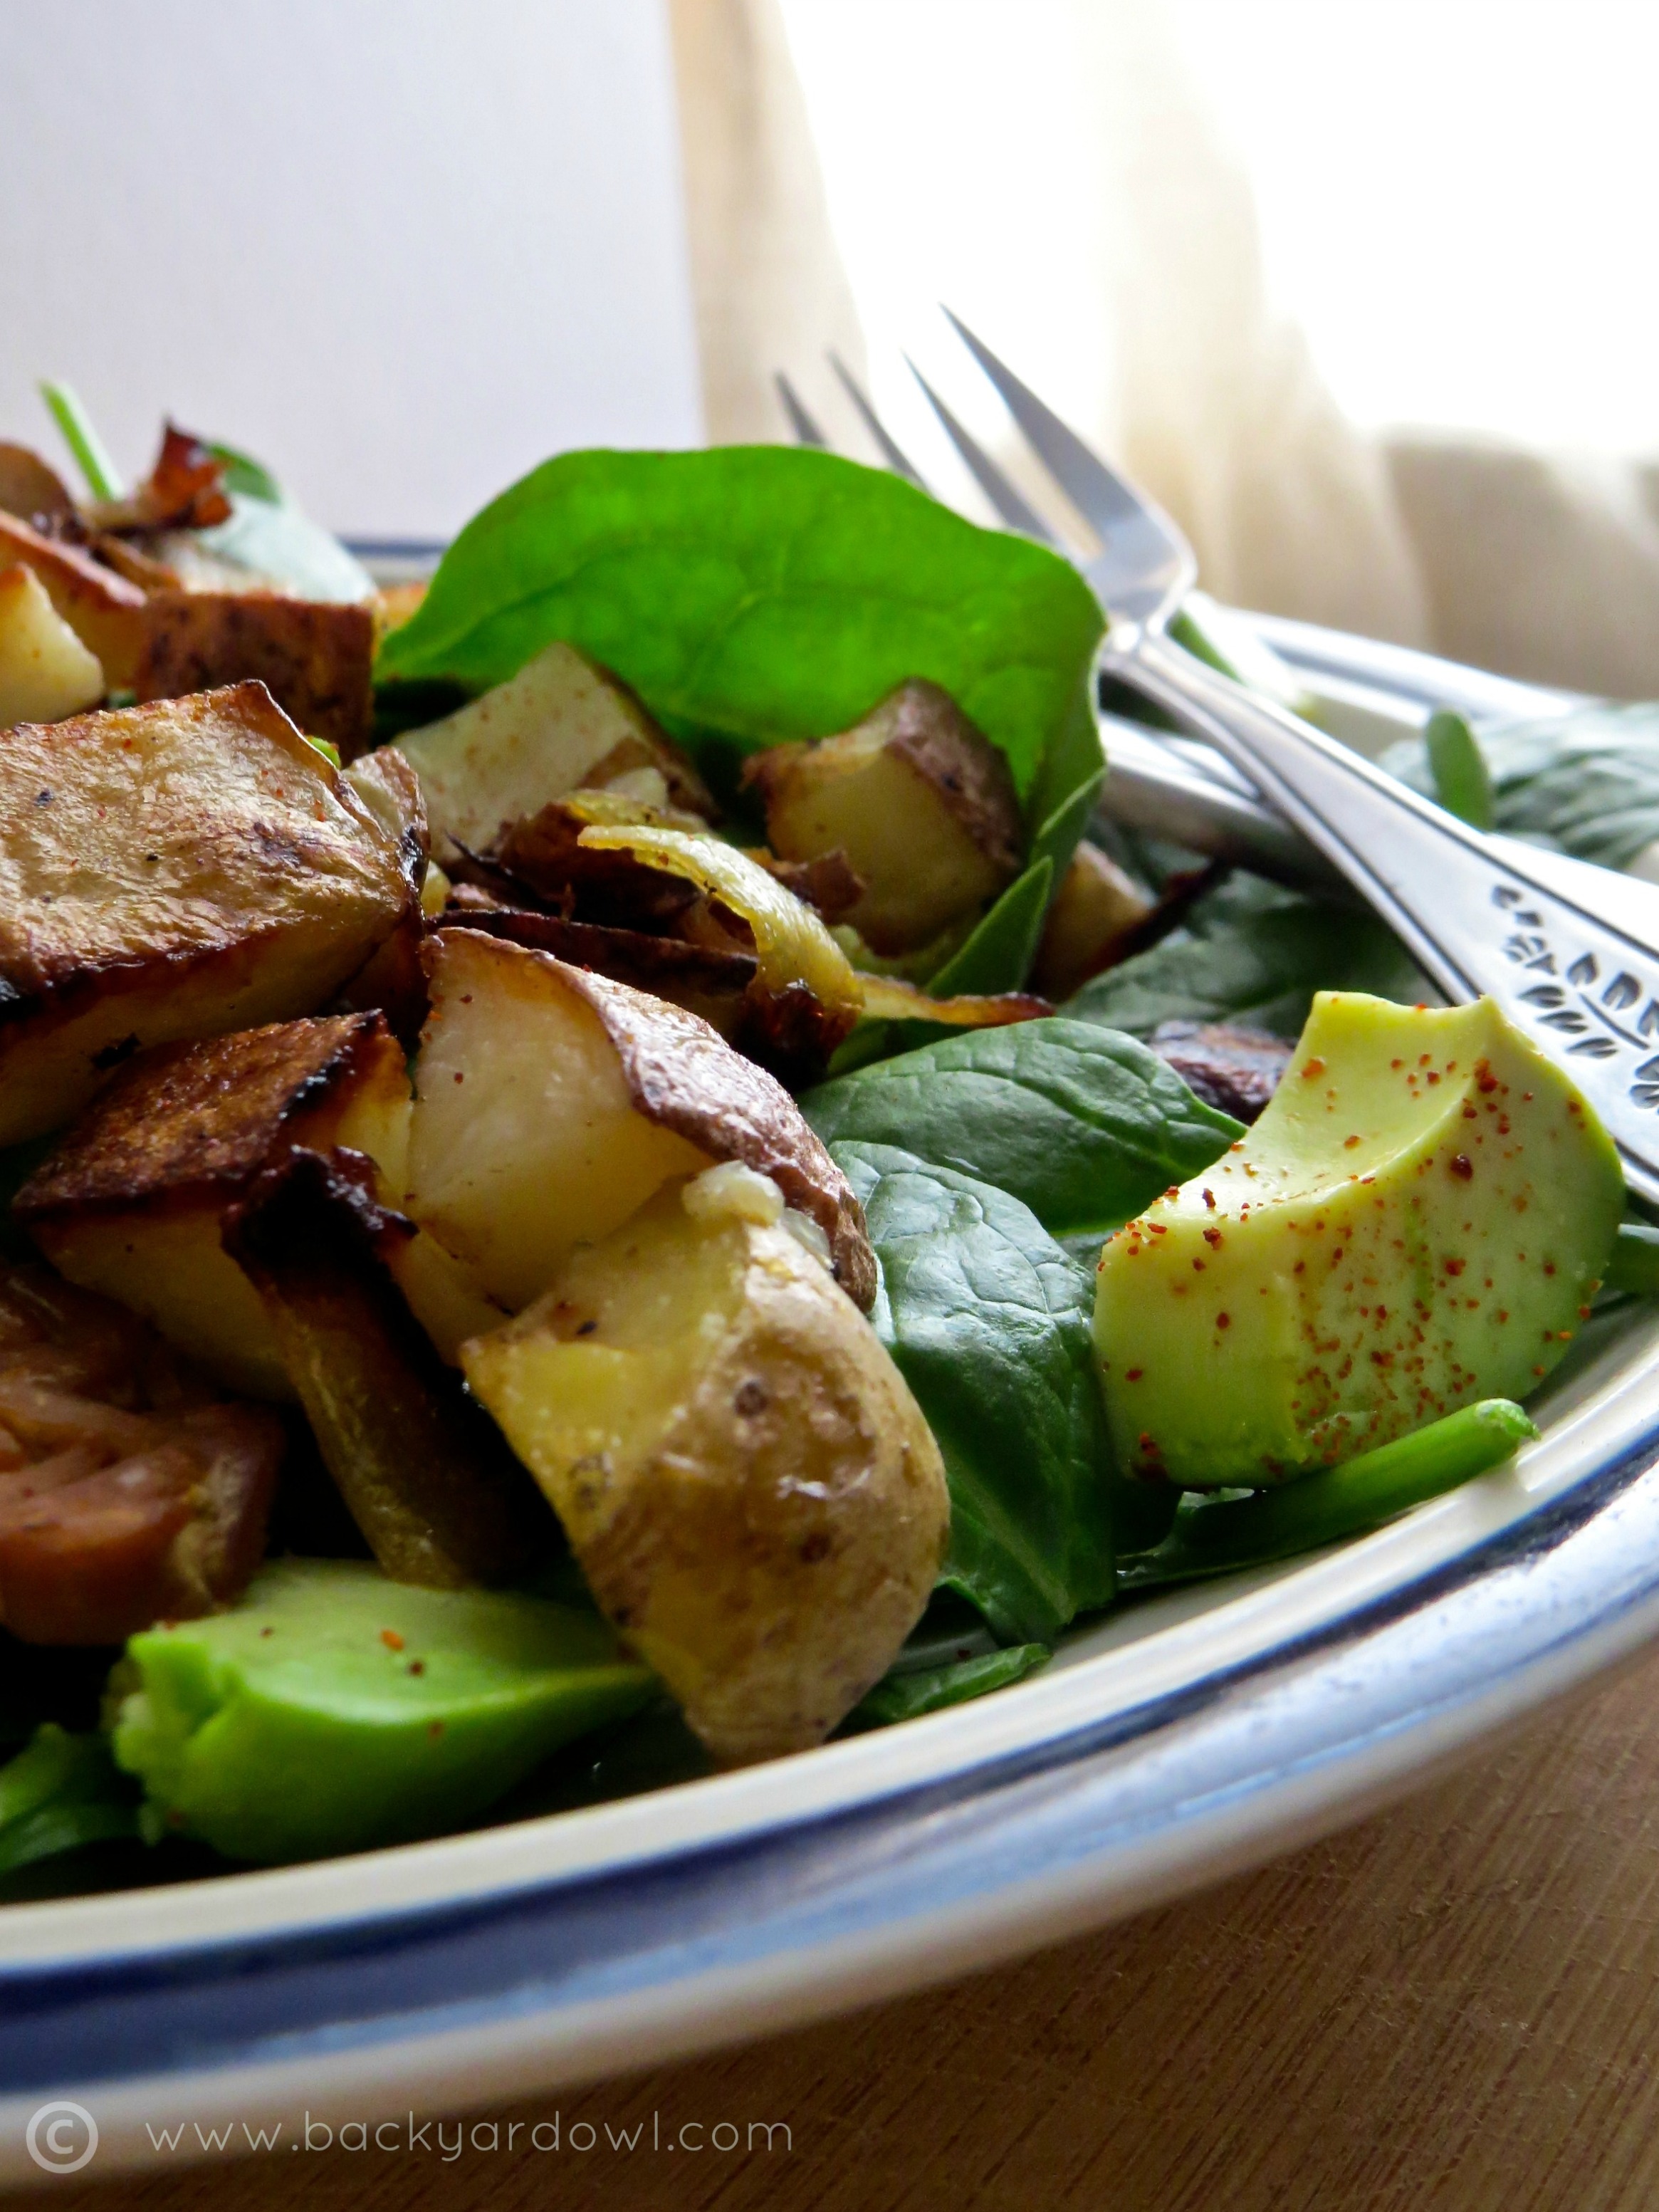 spinach salad with tempeh, avocado, and roast potatoes